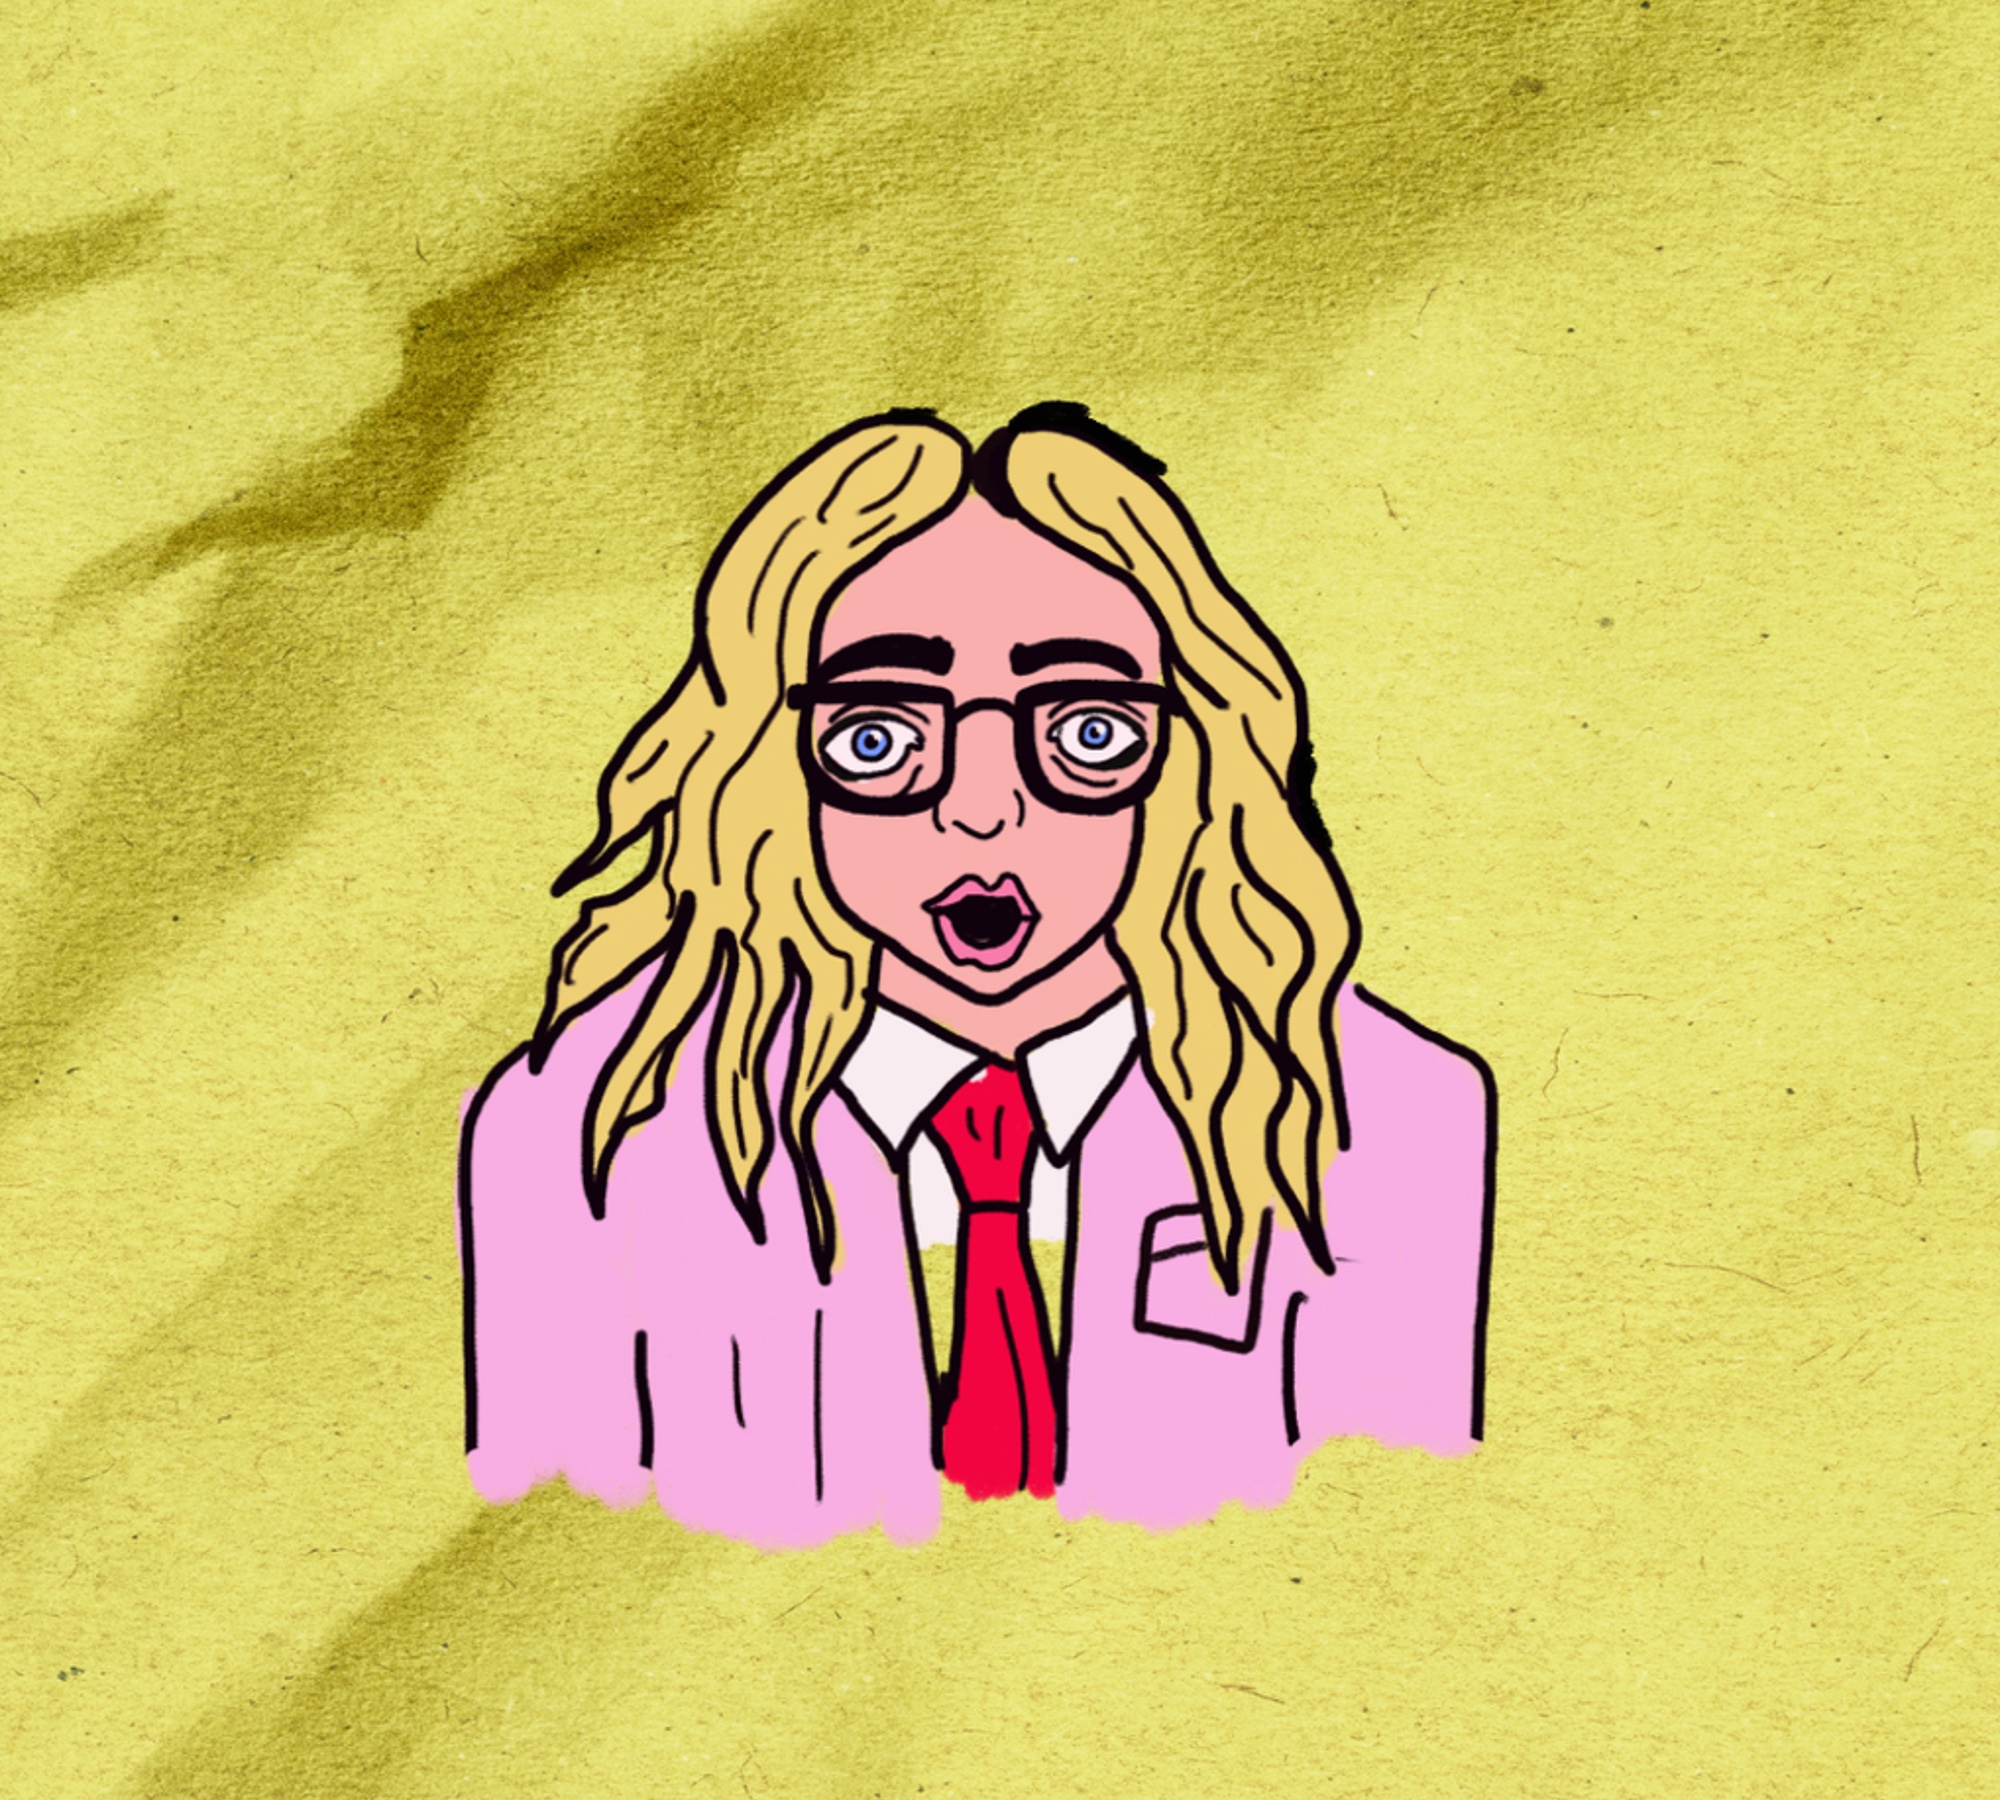 Illustration of a blond person with long hair wearing a pink suite